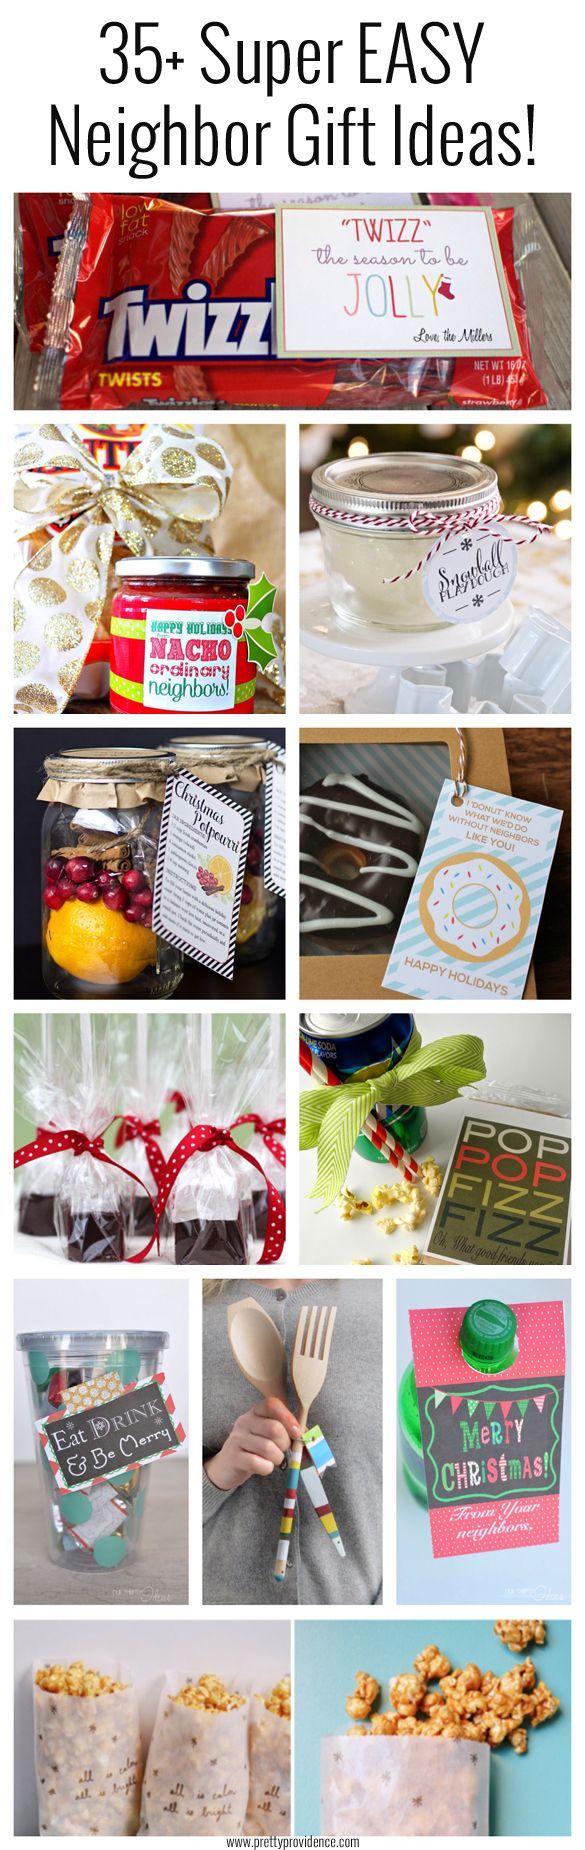 I LOVE all these neighbor gift ideas! Nothing beats cute, thoughtful and EASY! Best list I’ve seen…